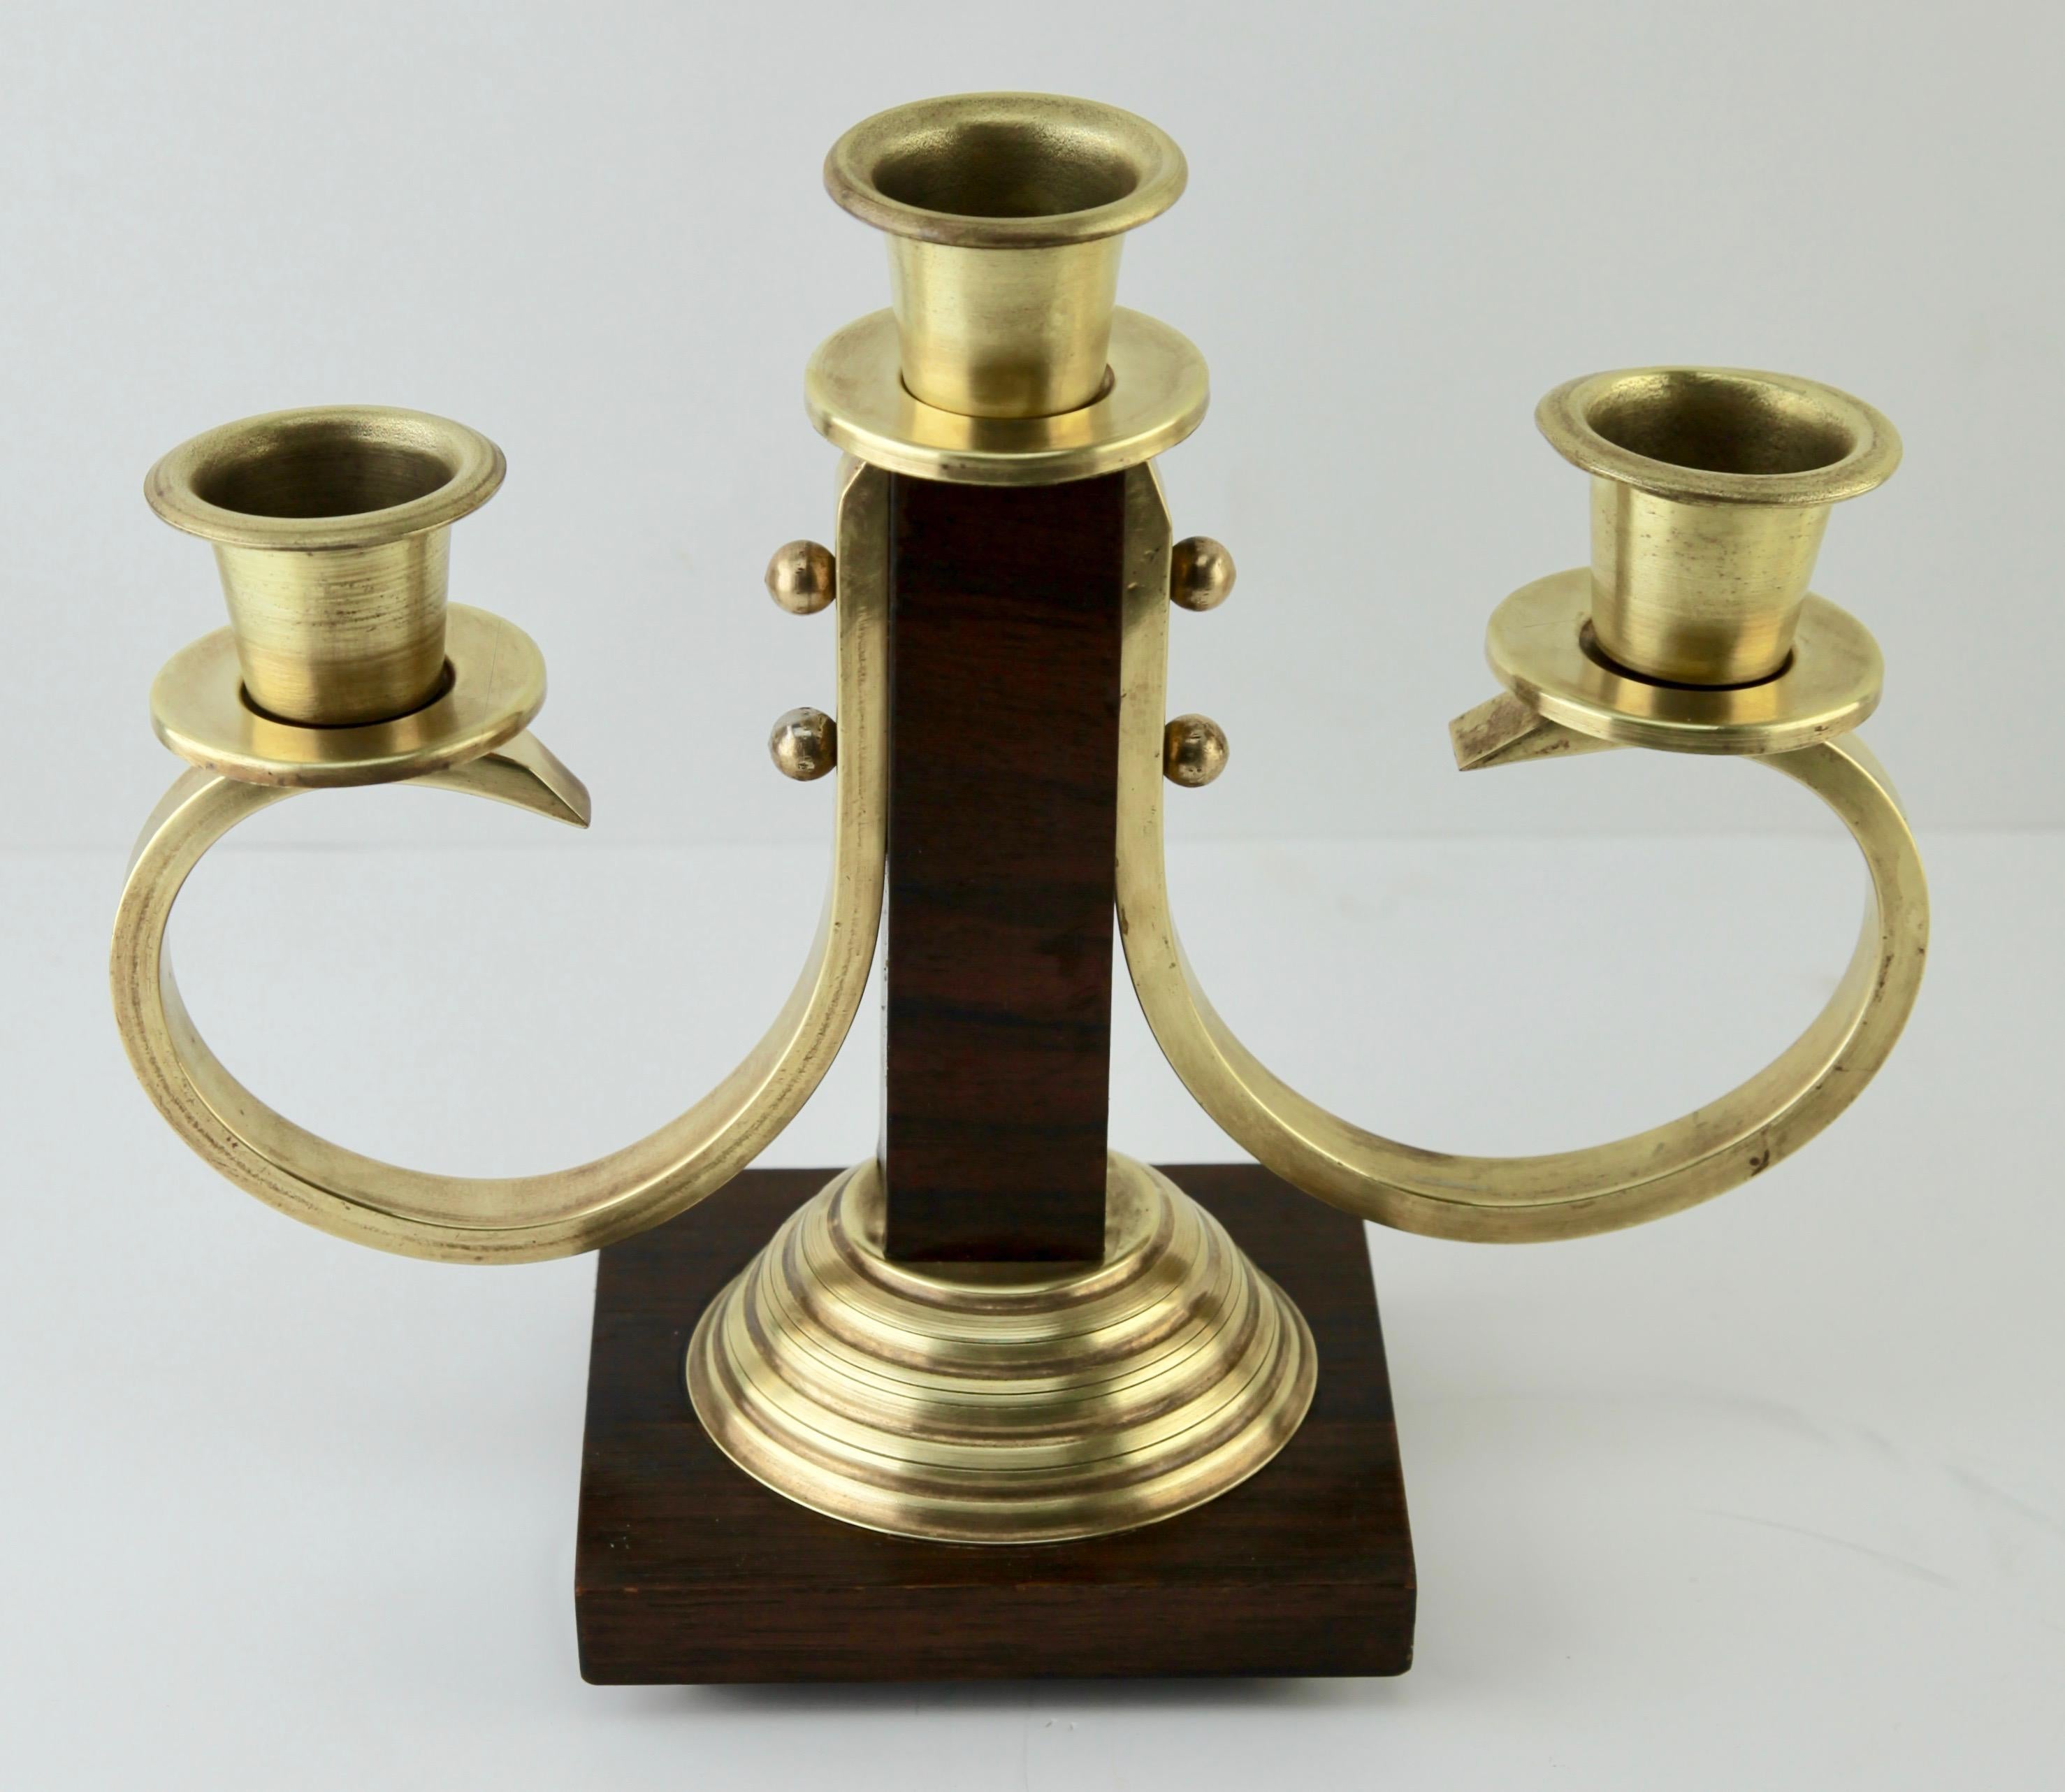 Hand-Crafted Art Deco Wooden and Brass Pair of Candlesticks, 1930s For Sale